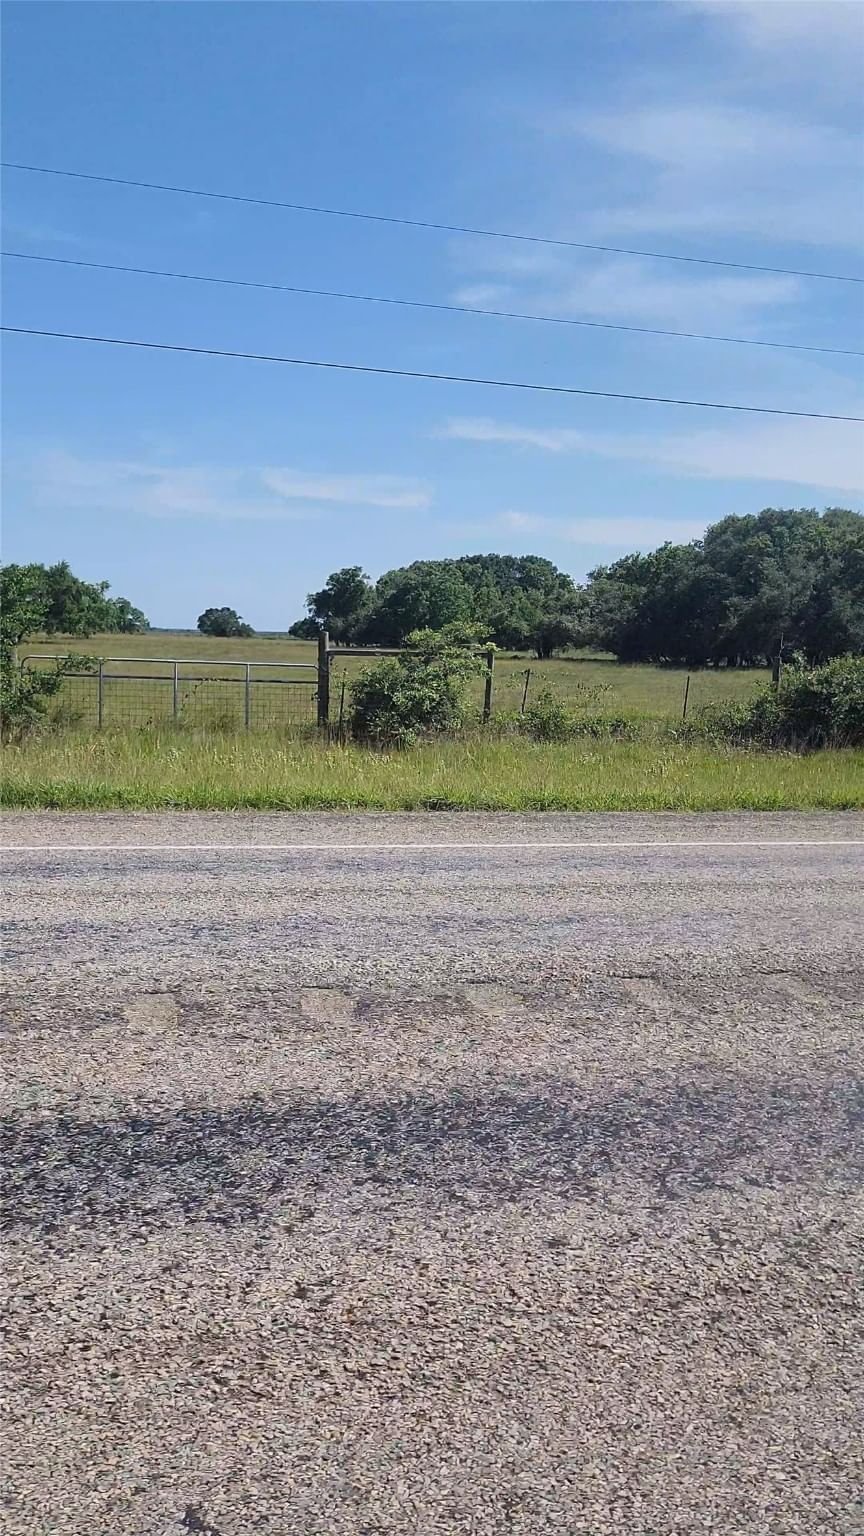 Real estate property located at 0 State Highway 111, Matagorda, I&GNRR Co, Sur 5, Blk. 7, Bay City, TX, US